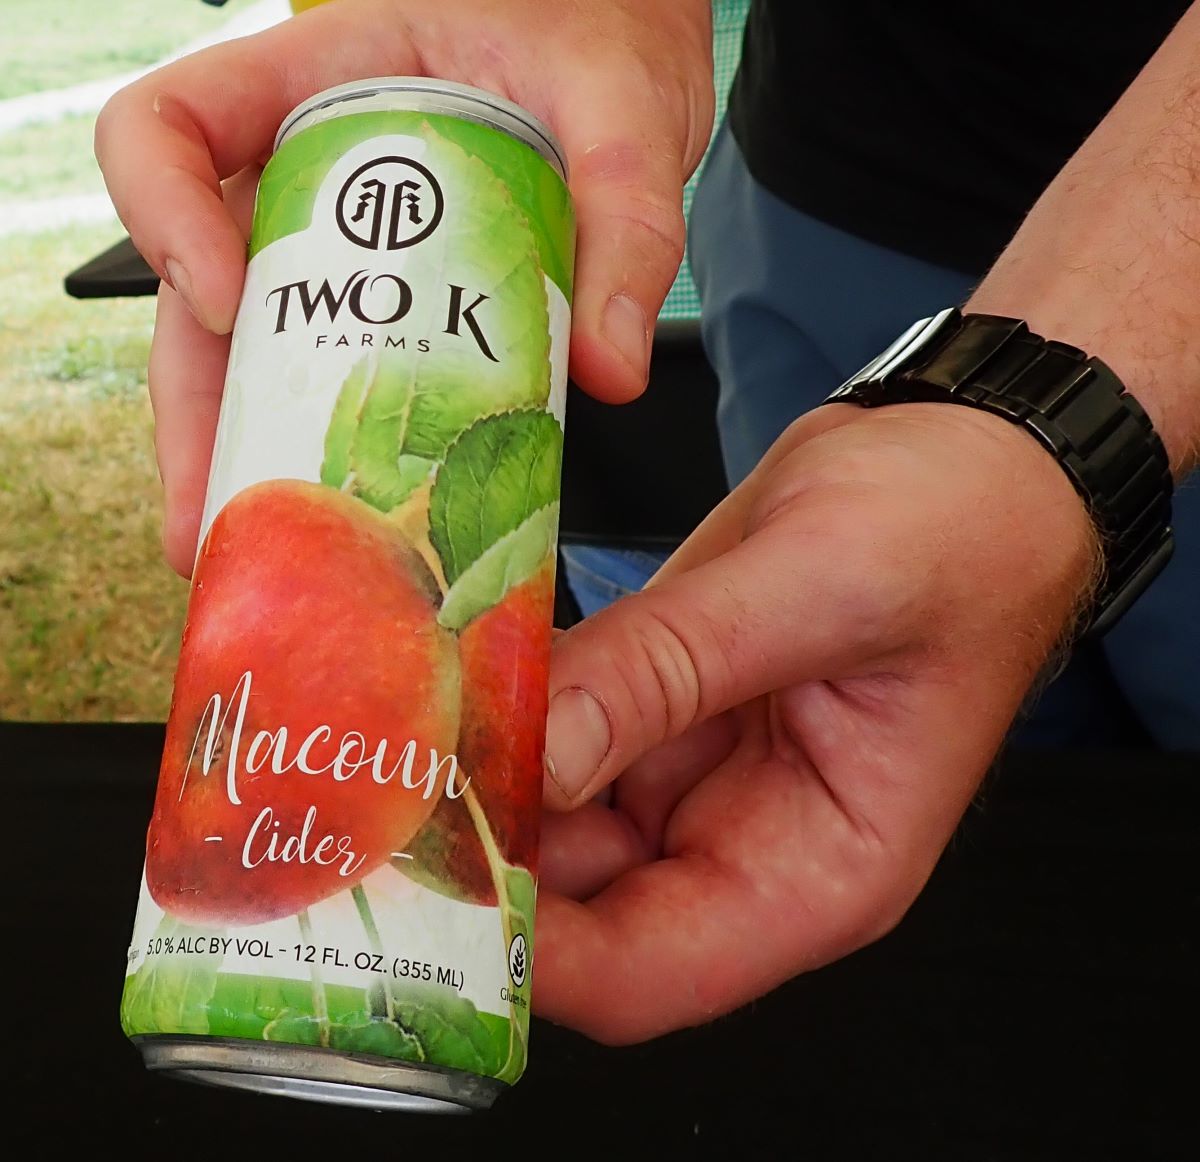 Macoun Cider from 2k Farms and Cidery near Suttons Bay, Michigan